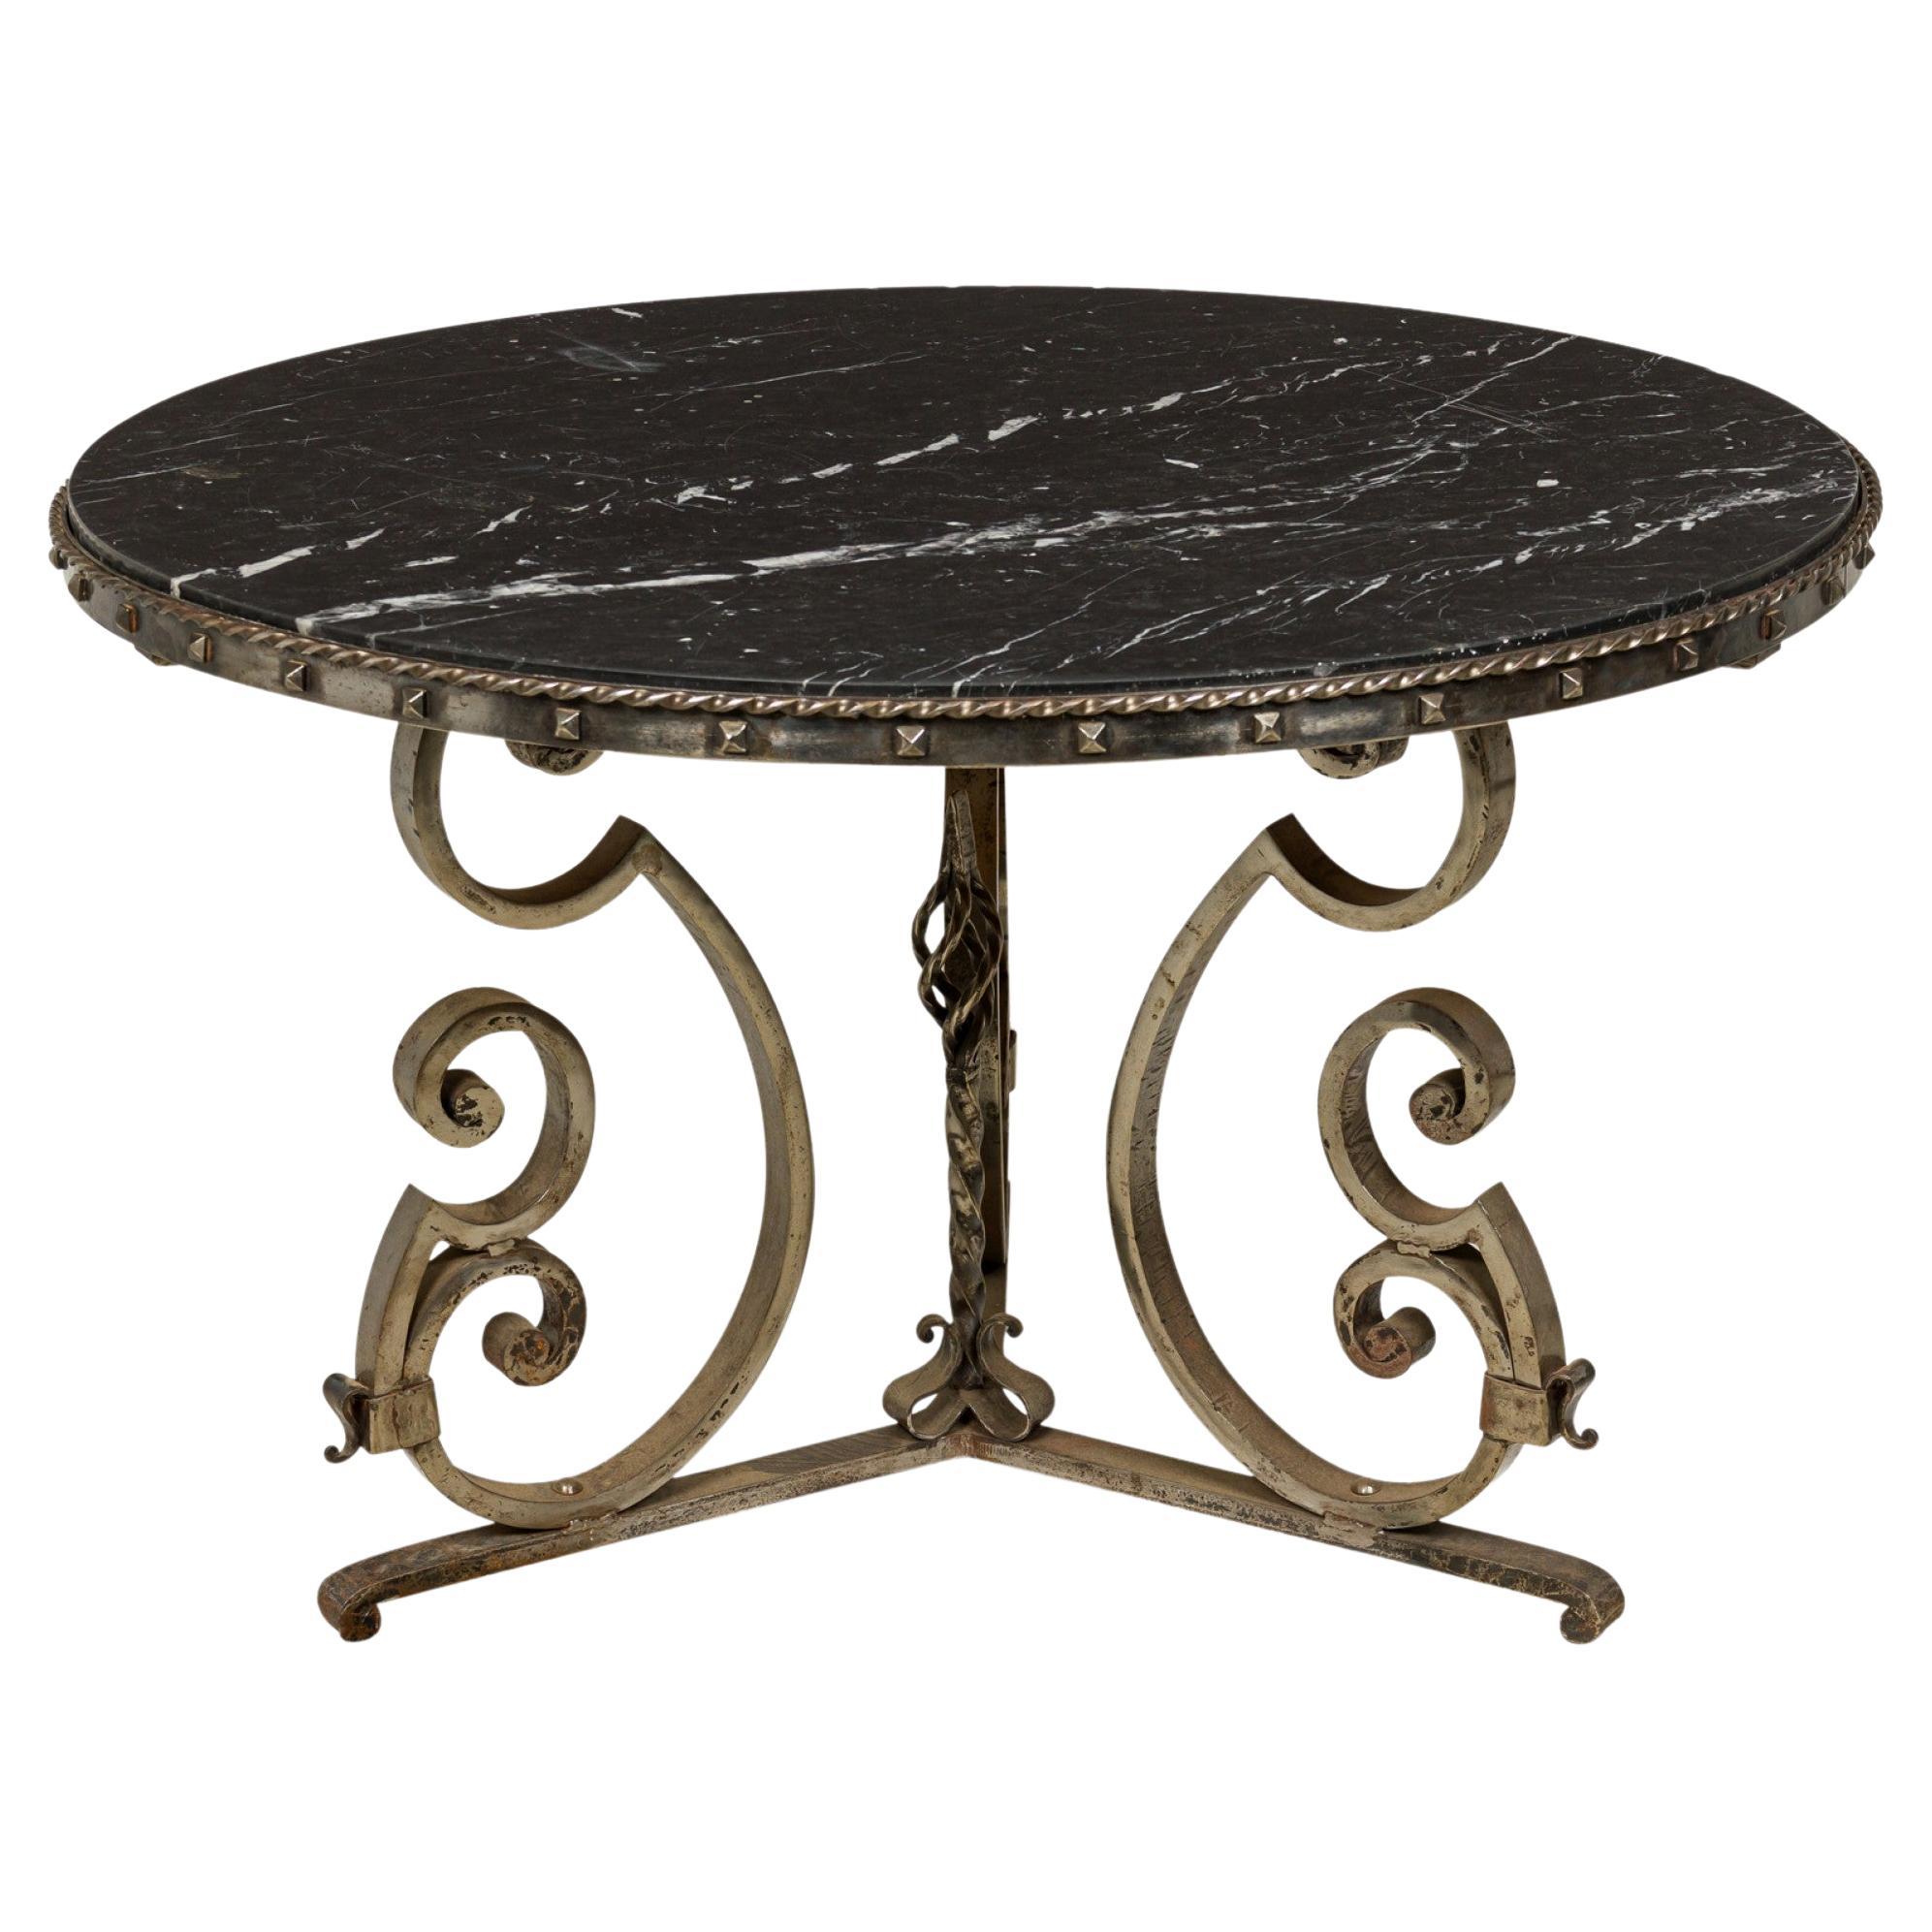 French Art Deco Iron and Black Marble Circular Scoll Form Center Table For Sale